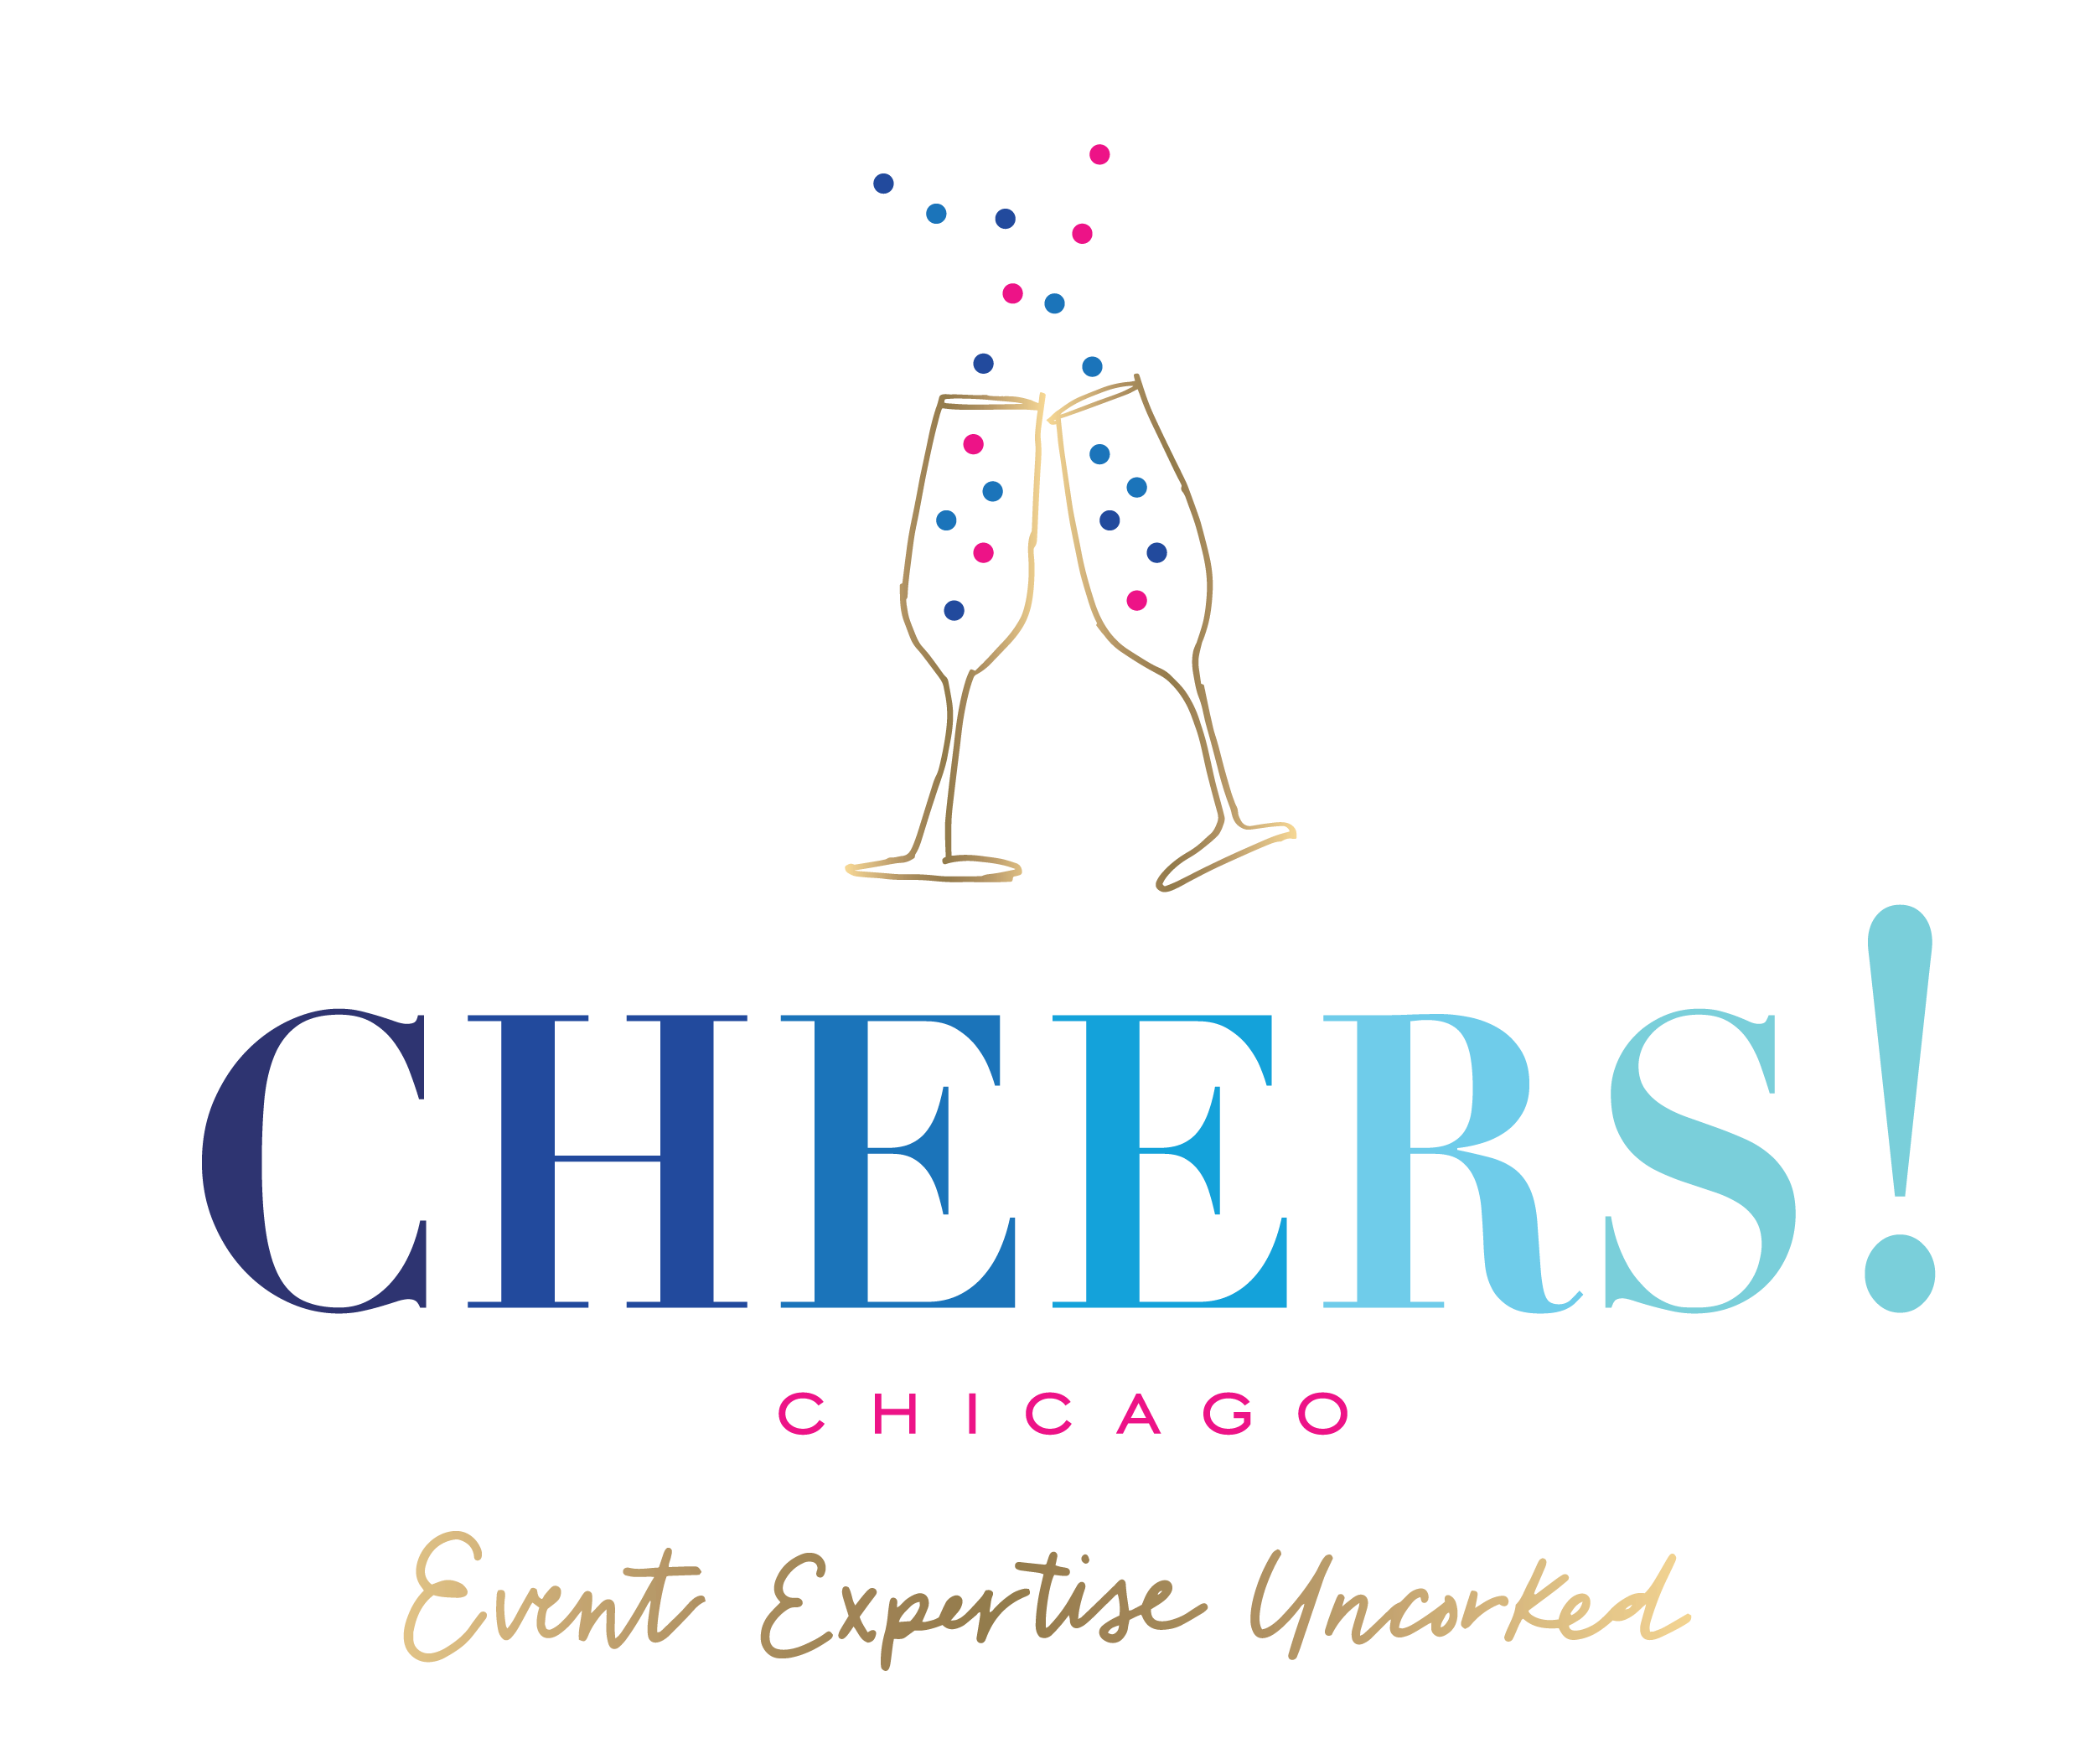 Cheers! Chicago